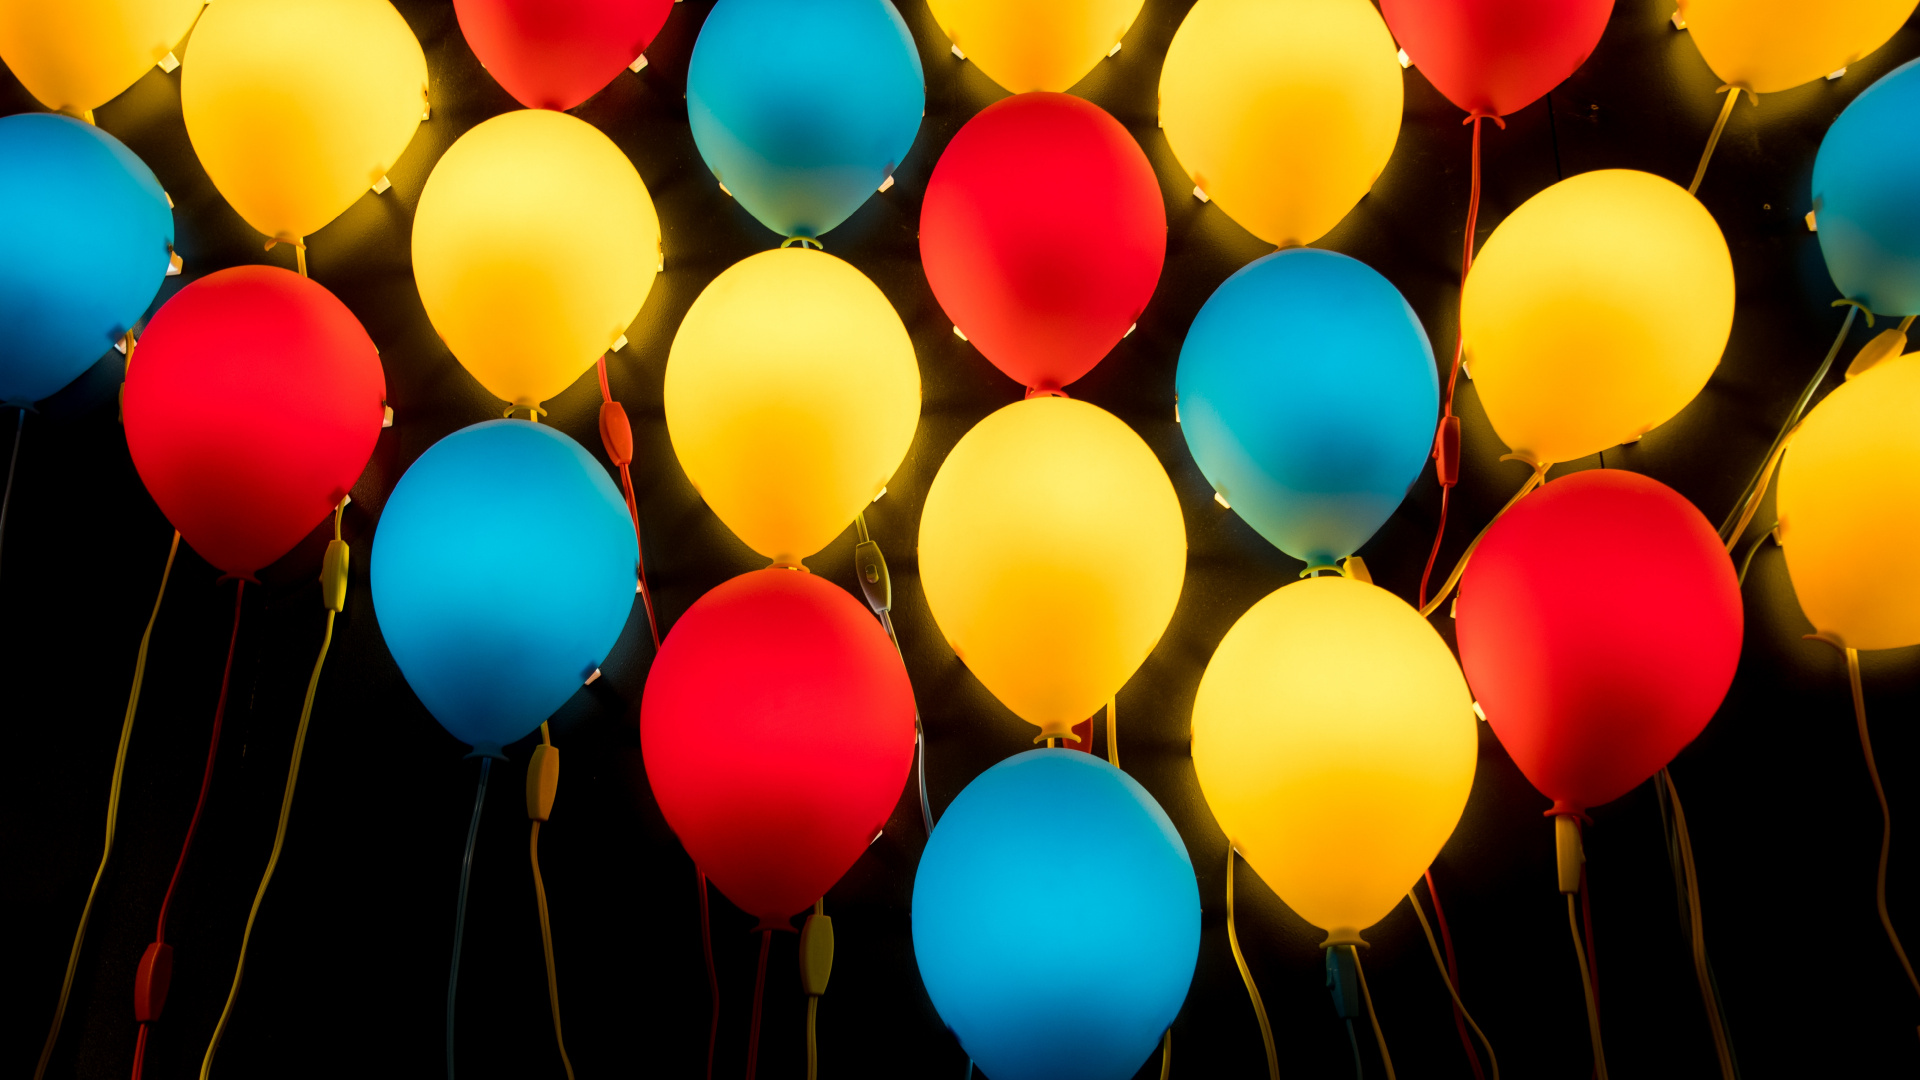 Yellow Blue and Red Balloons. Wallpaper in 1920x1080 Resolution